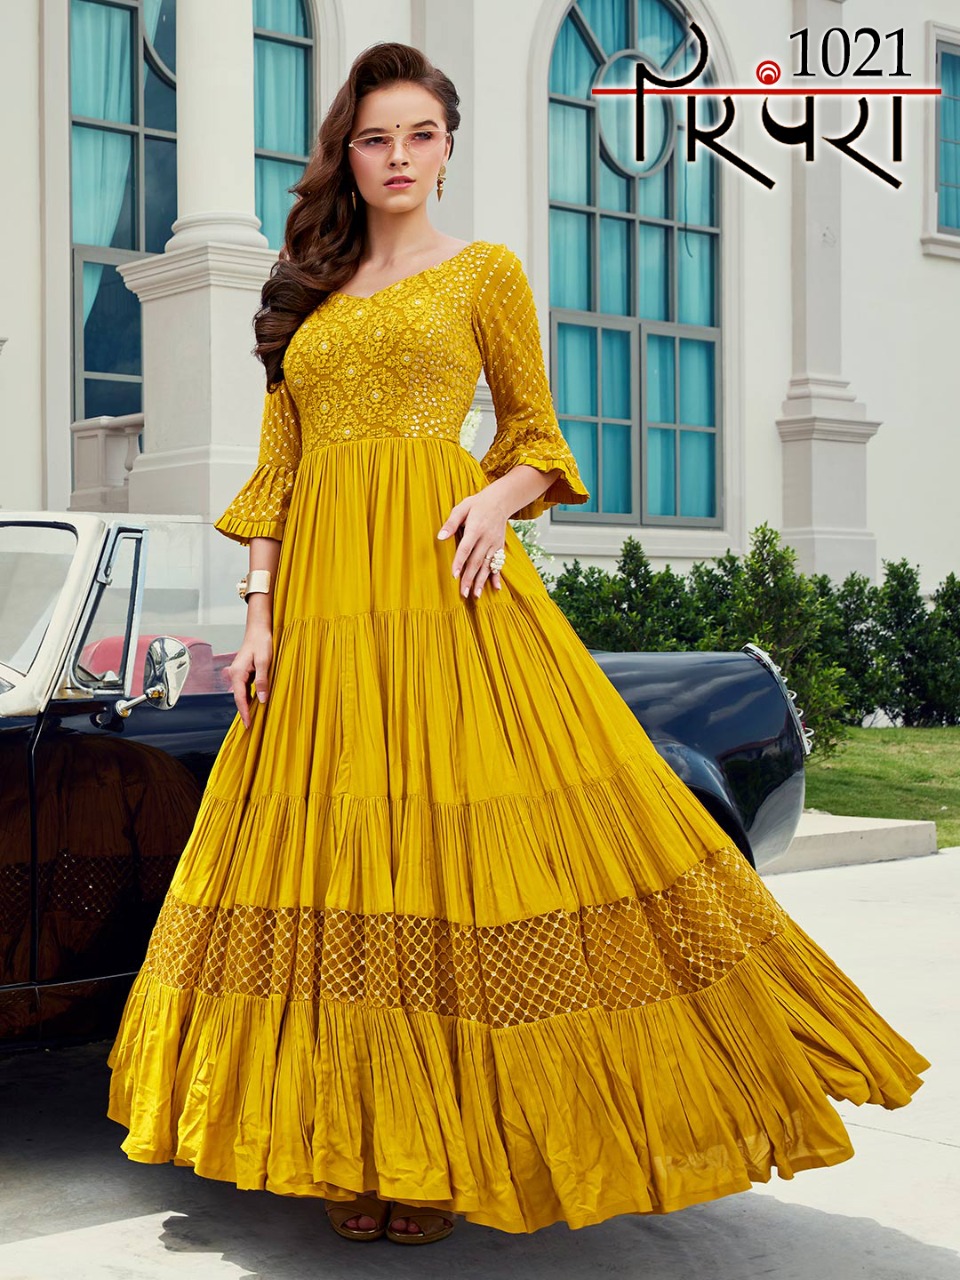 Parampara Gowns 1021